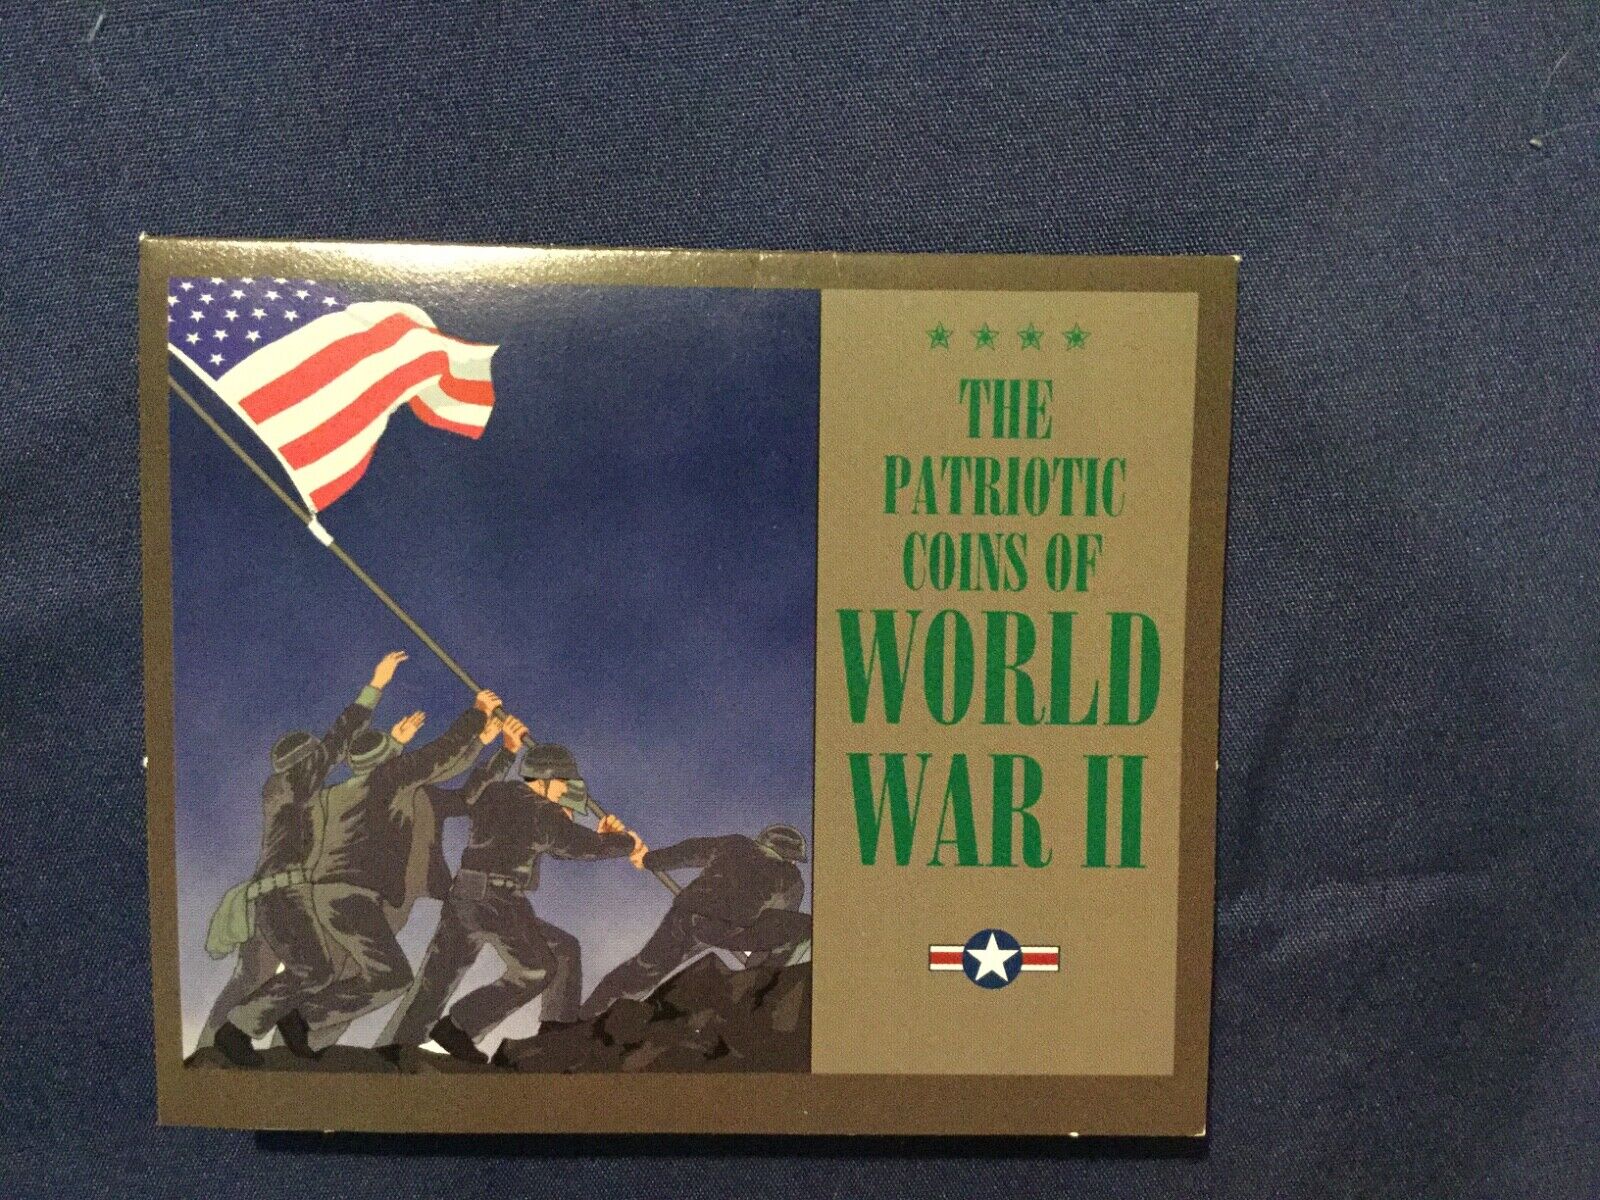 WWII Commemorative The Patriotic Coins of World War II